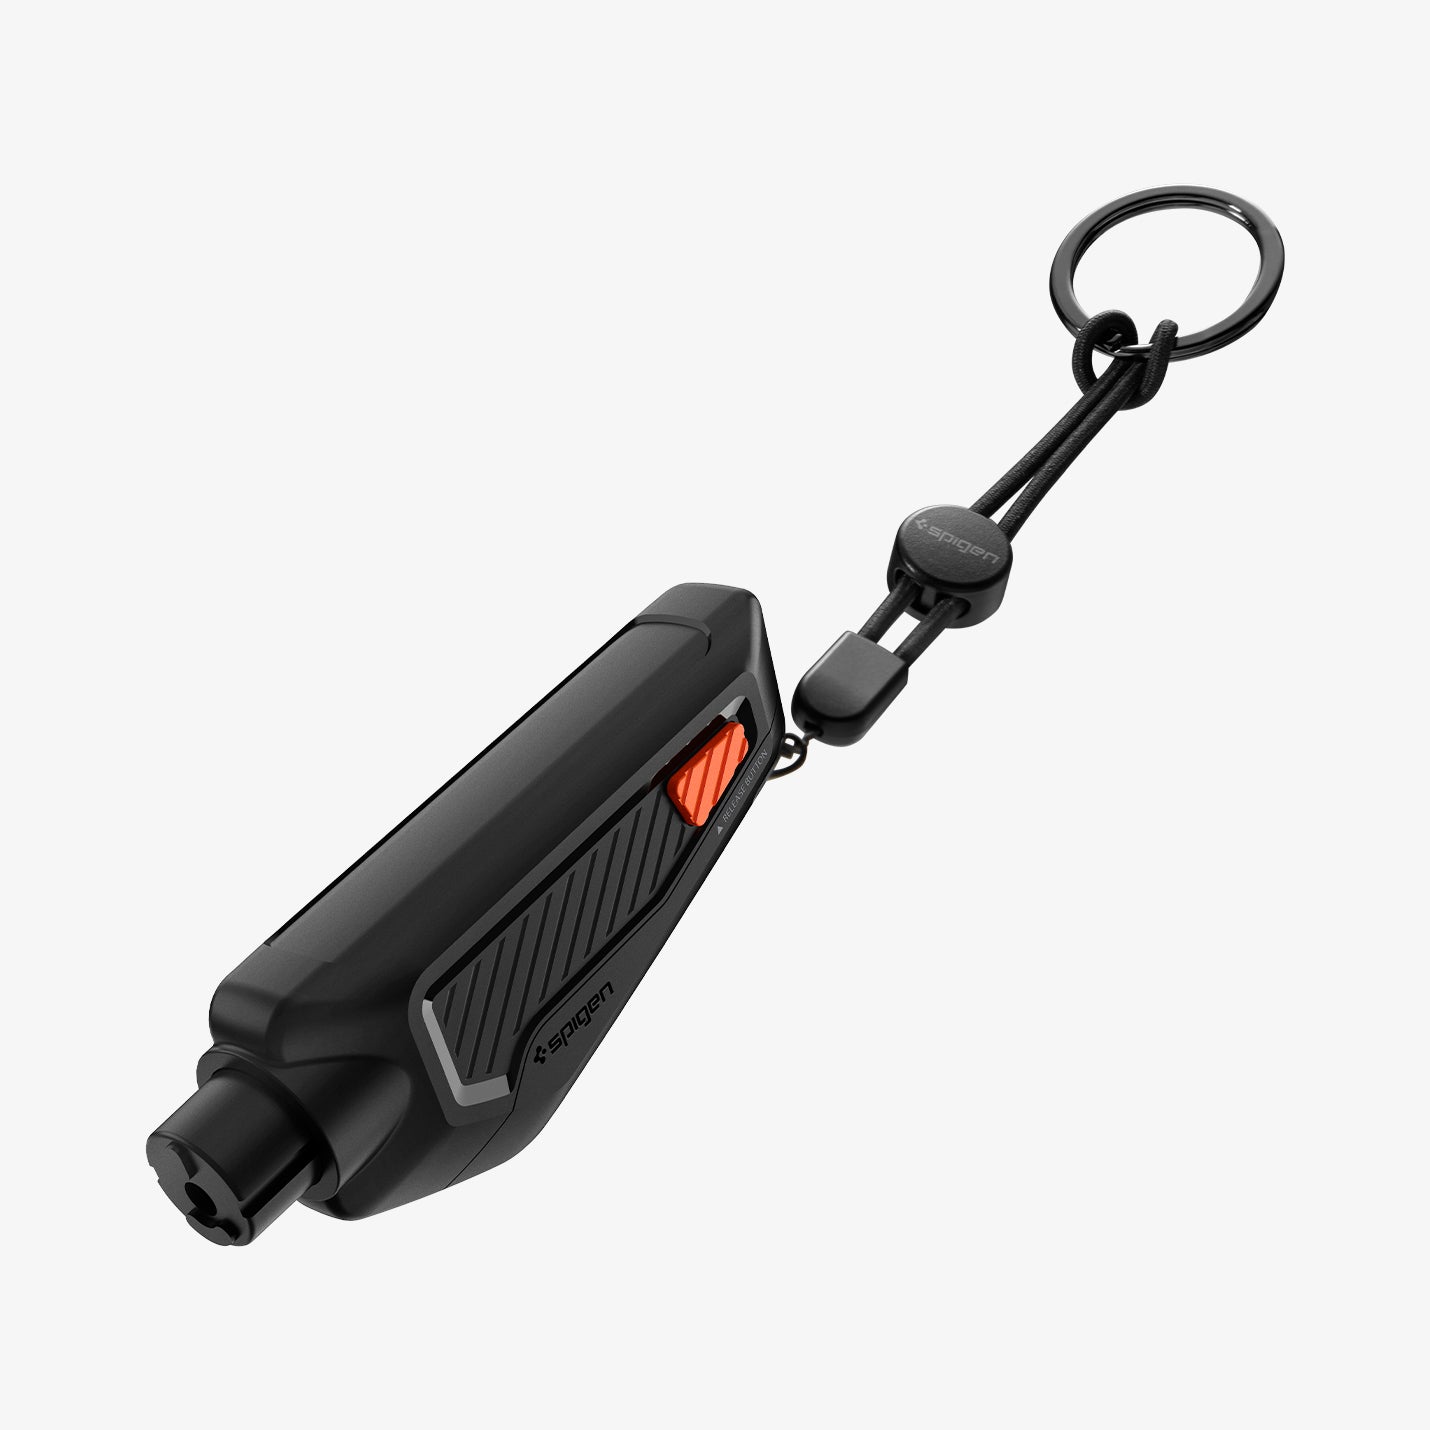 ACP06988 - Car Escape Tool in Black showing the top, round tip, partial side with a string and a key ring attached